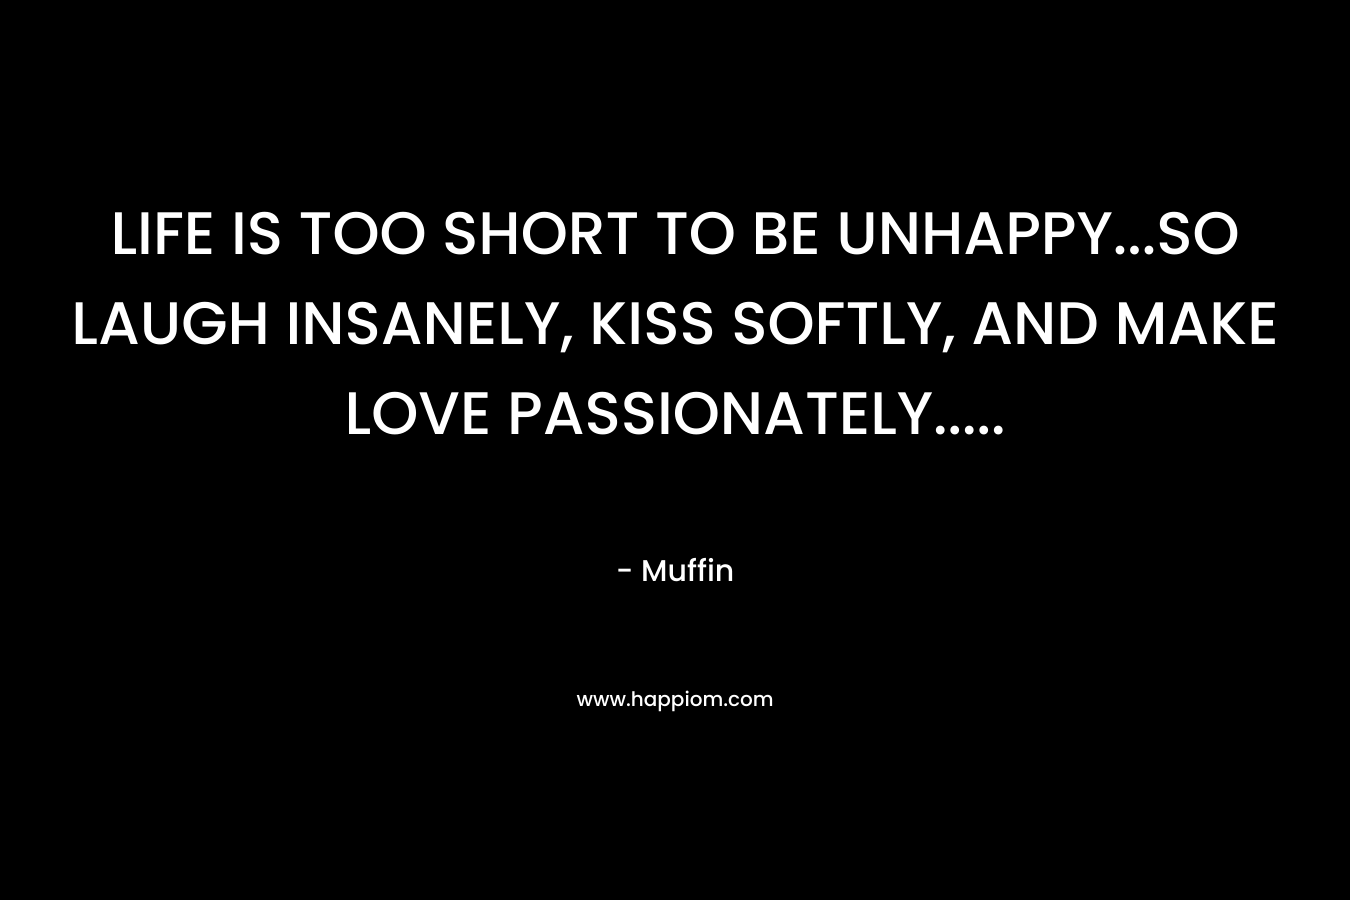 LIFE IS TOO SHORT TO BE UNHAPPY...SO LAUGH INSANELY, KISS SOFTLY, AND MAKE LOVE PASSIONATELY.....